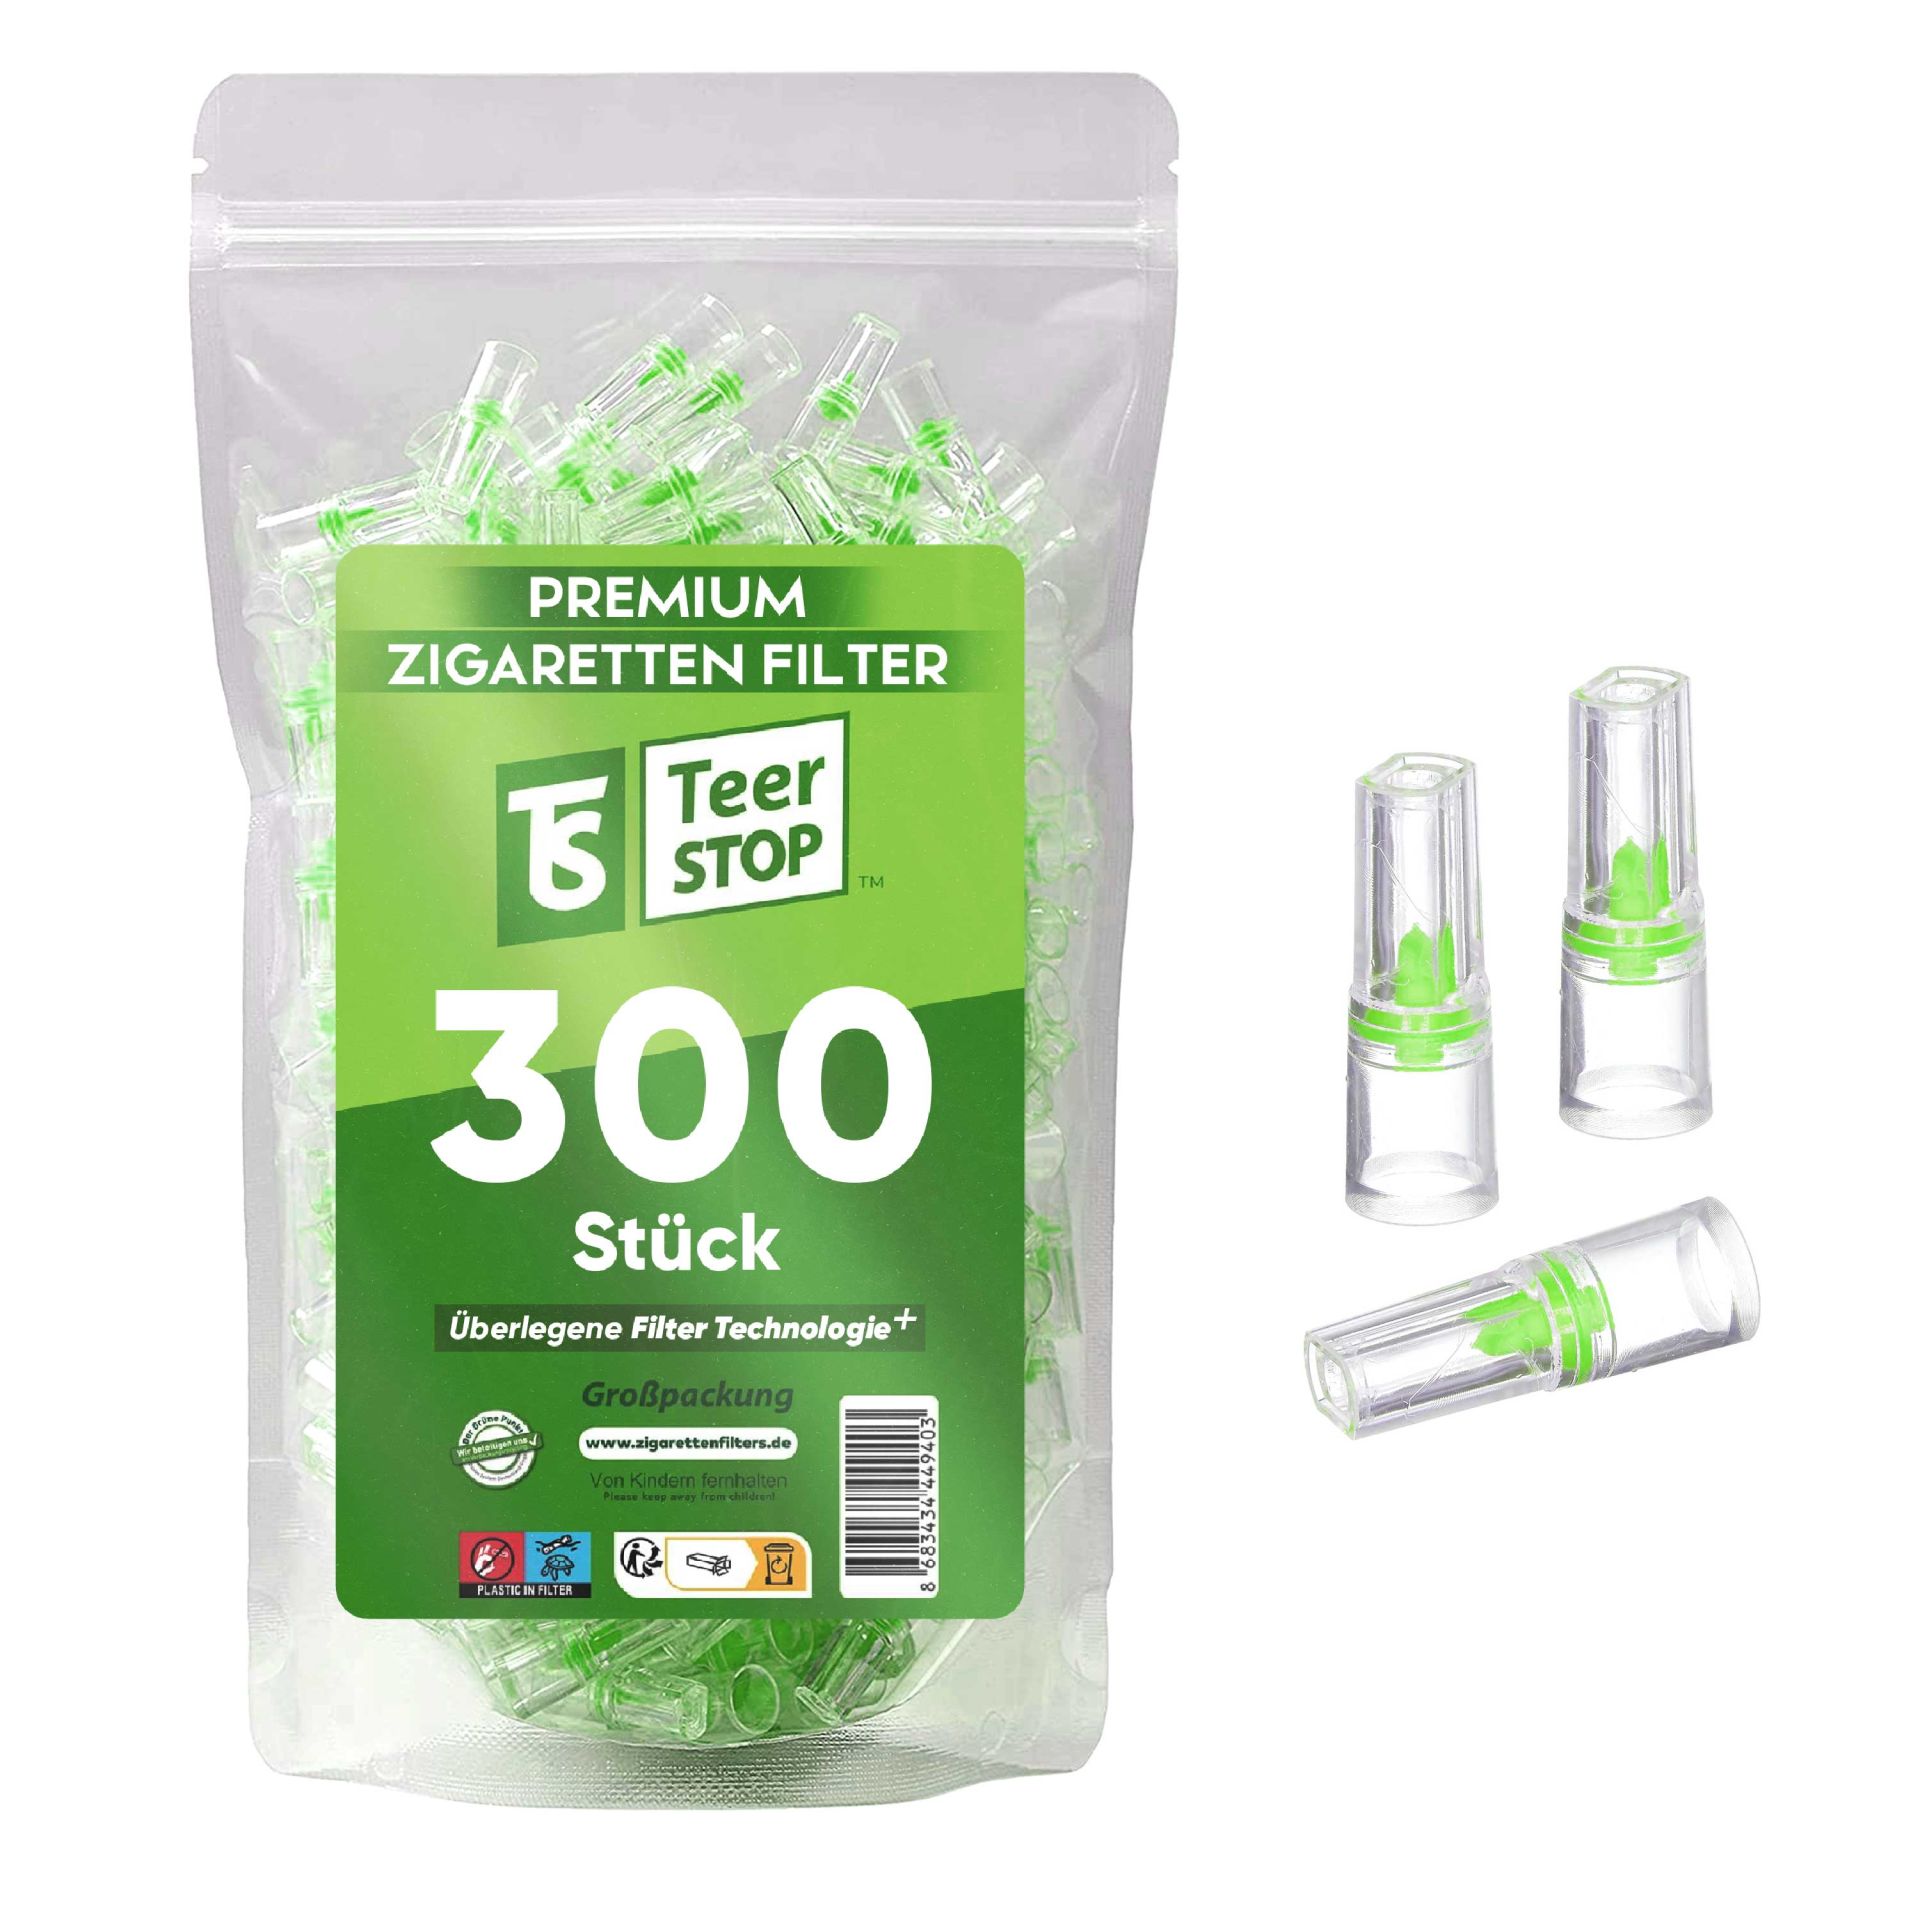 TS Teer STOP Disposable Cigarette Filters for Smokers (300 Pieces)